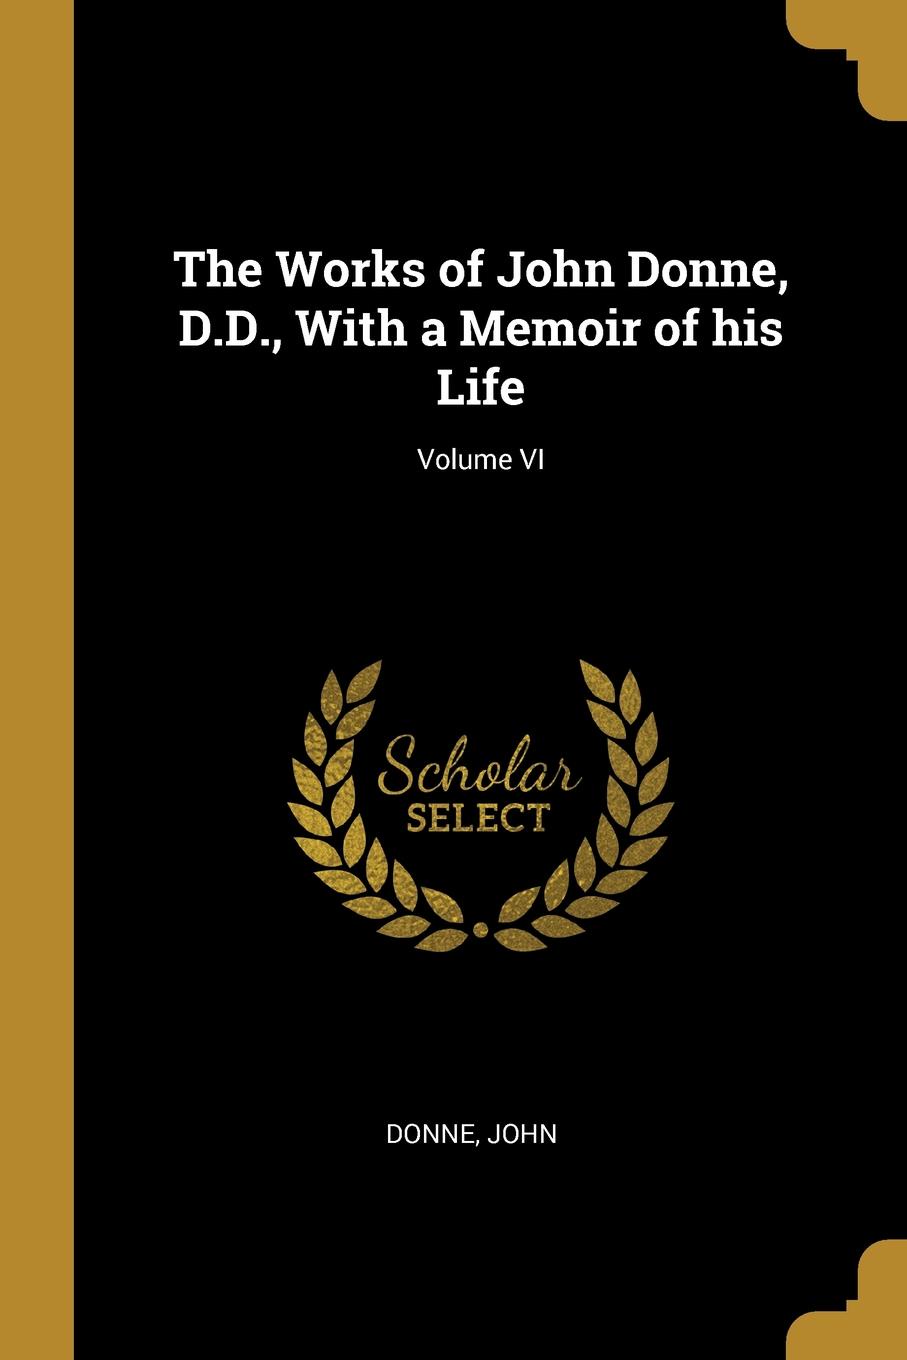 The Works of John Donne, D.D., With a Memoir of his Life; Volume VI